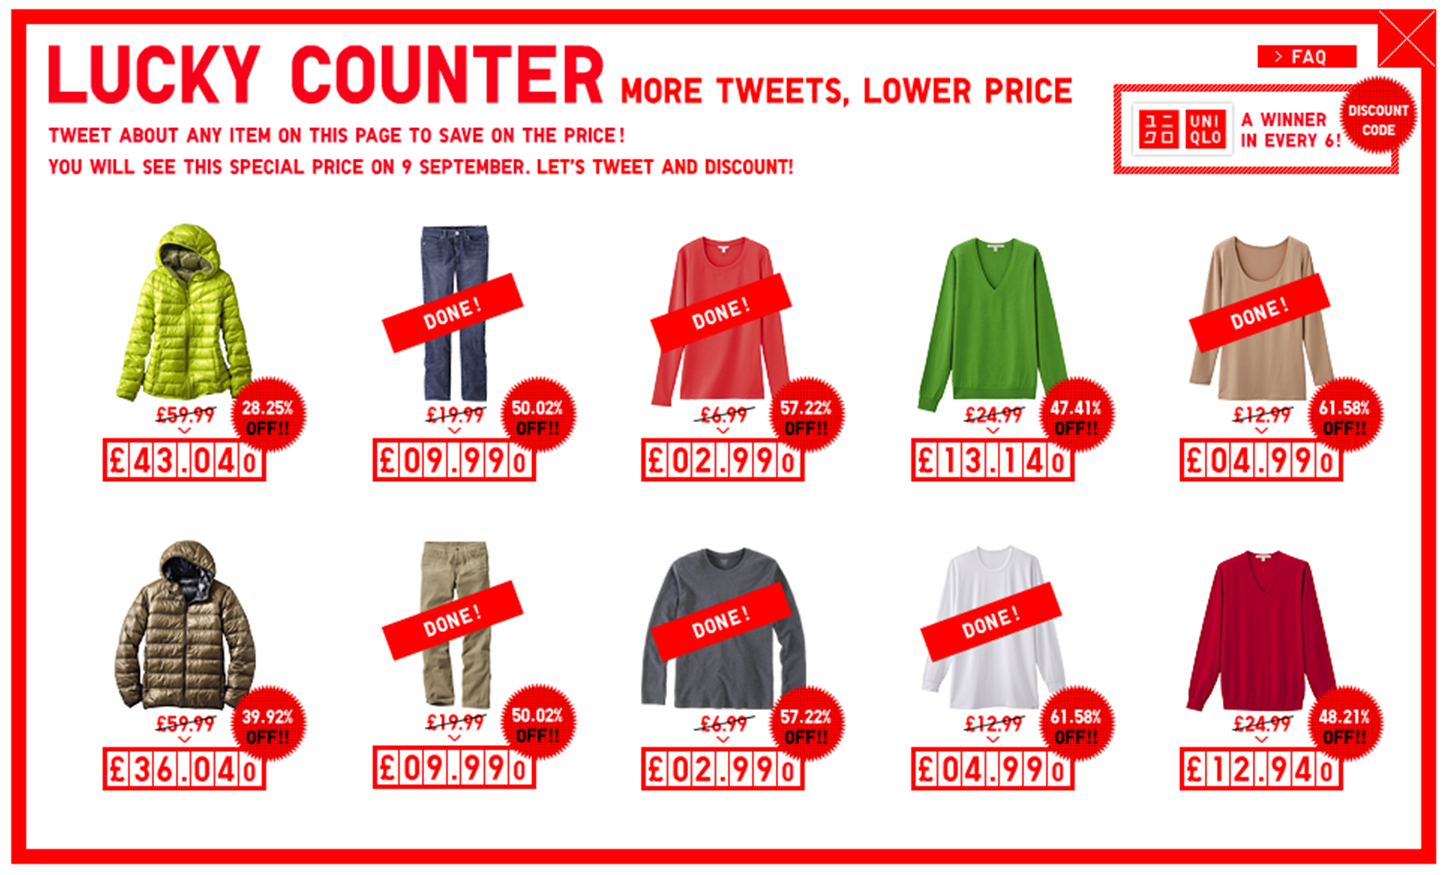 Not count price. Юникло баннер. Вещи из юникло. Clothes and Prices. Clothes with Prices.